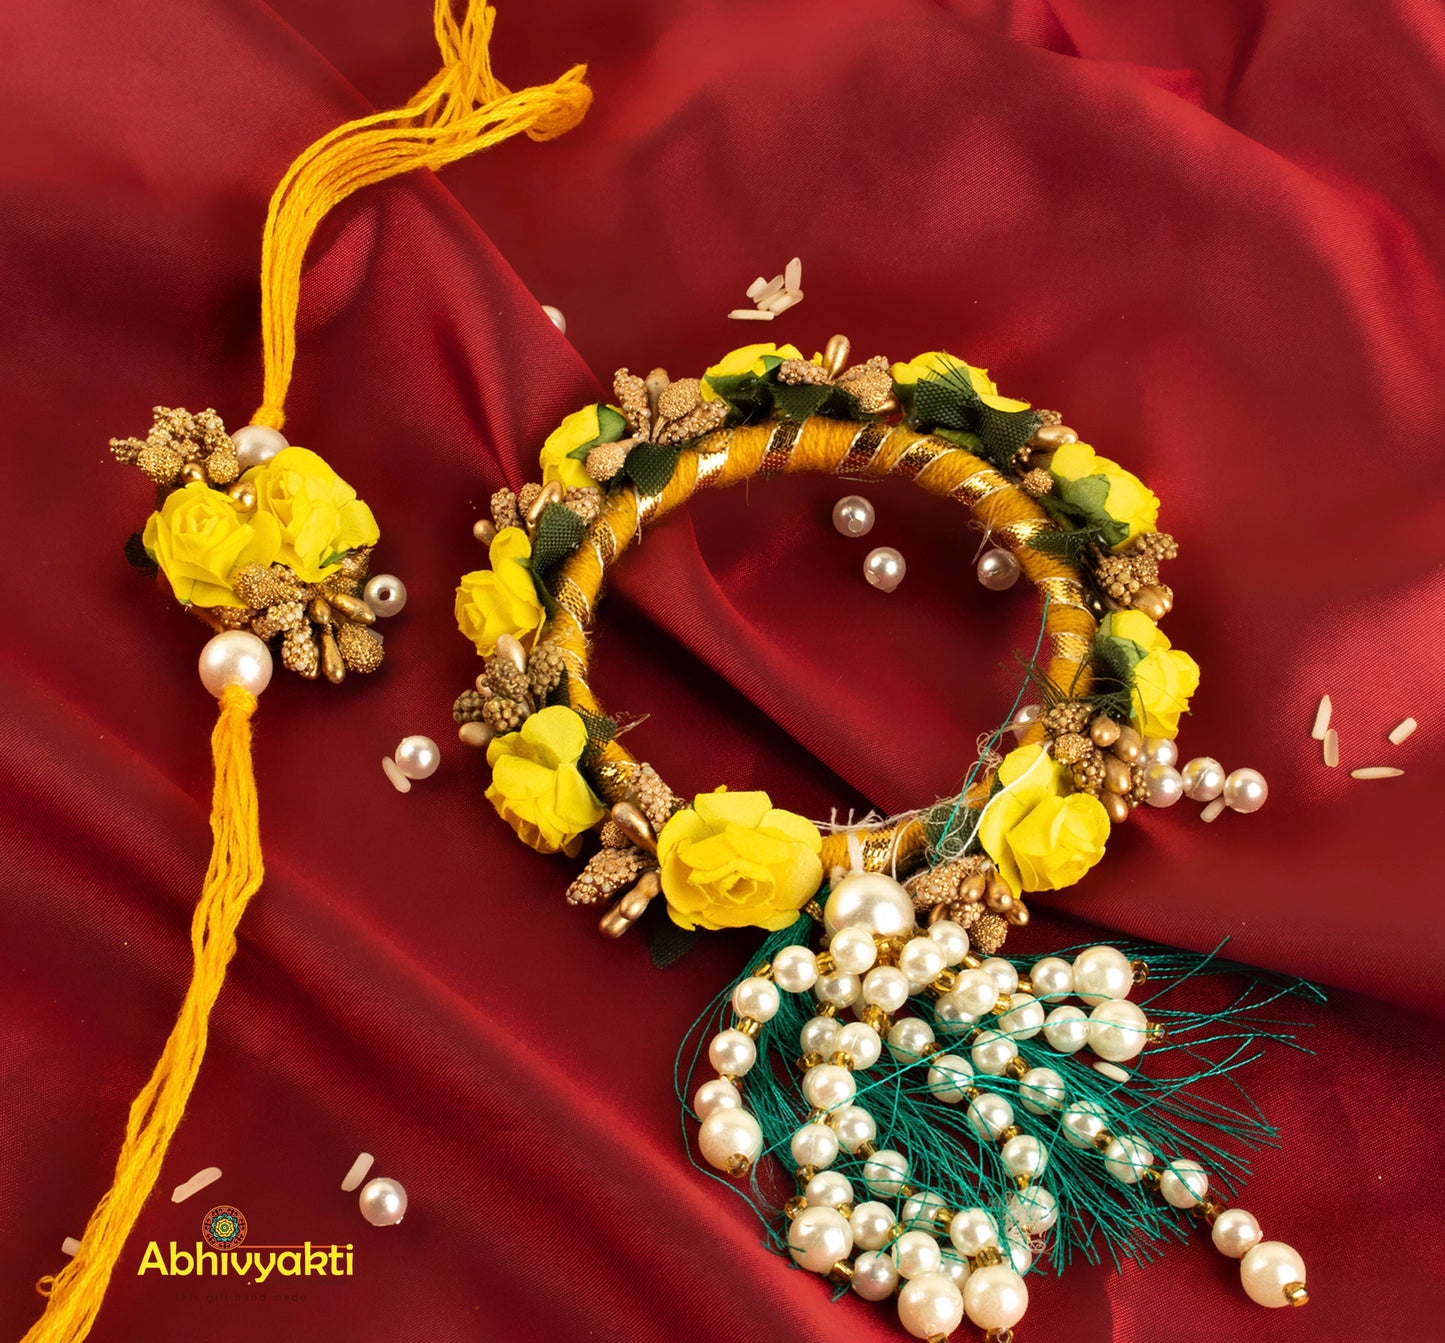 Yellow and white floral Rakhi lumba wreath adorned with pearls and beads.